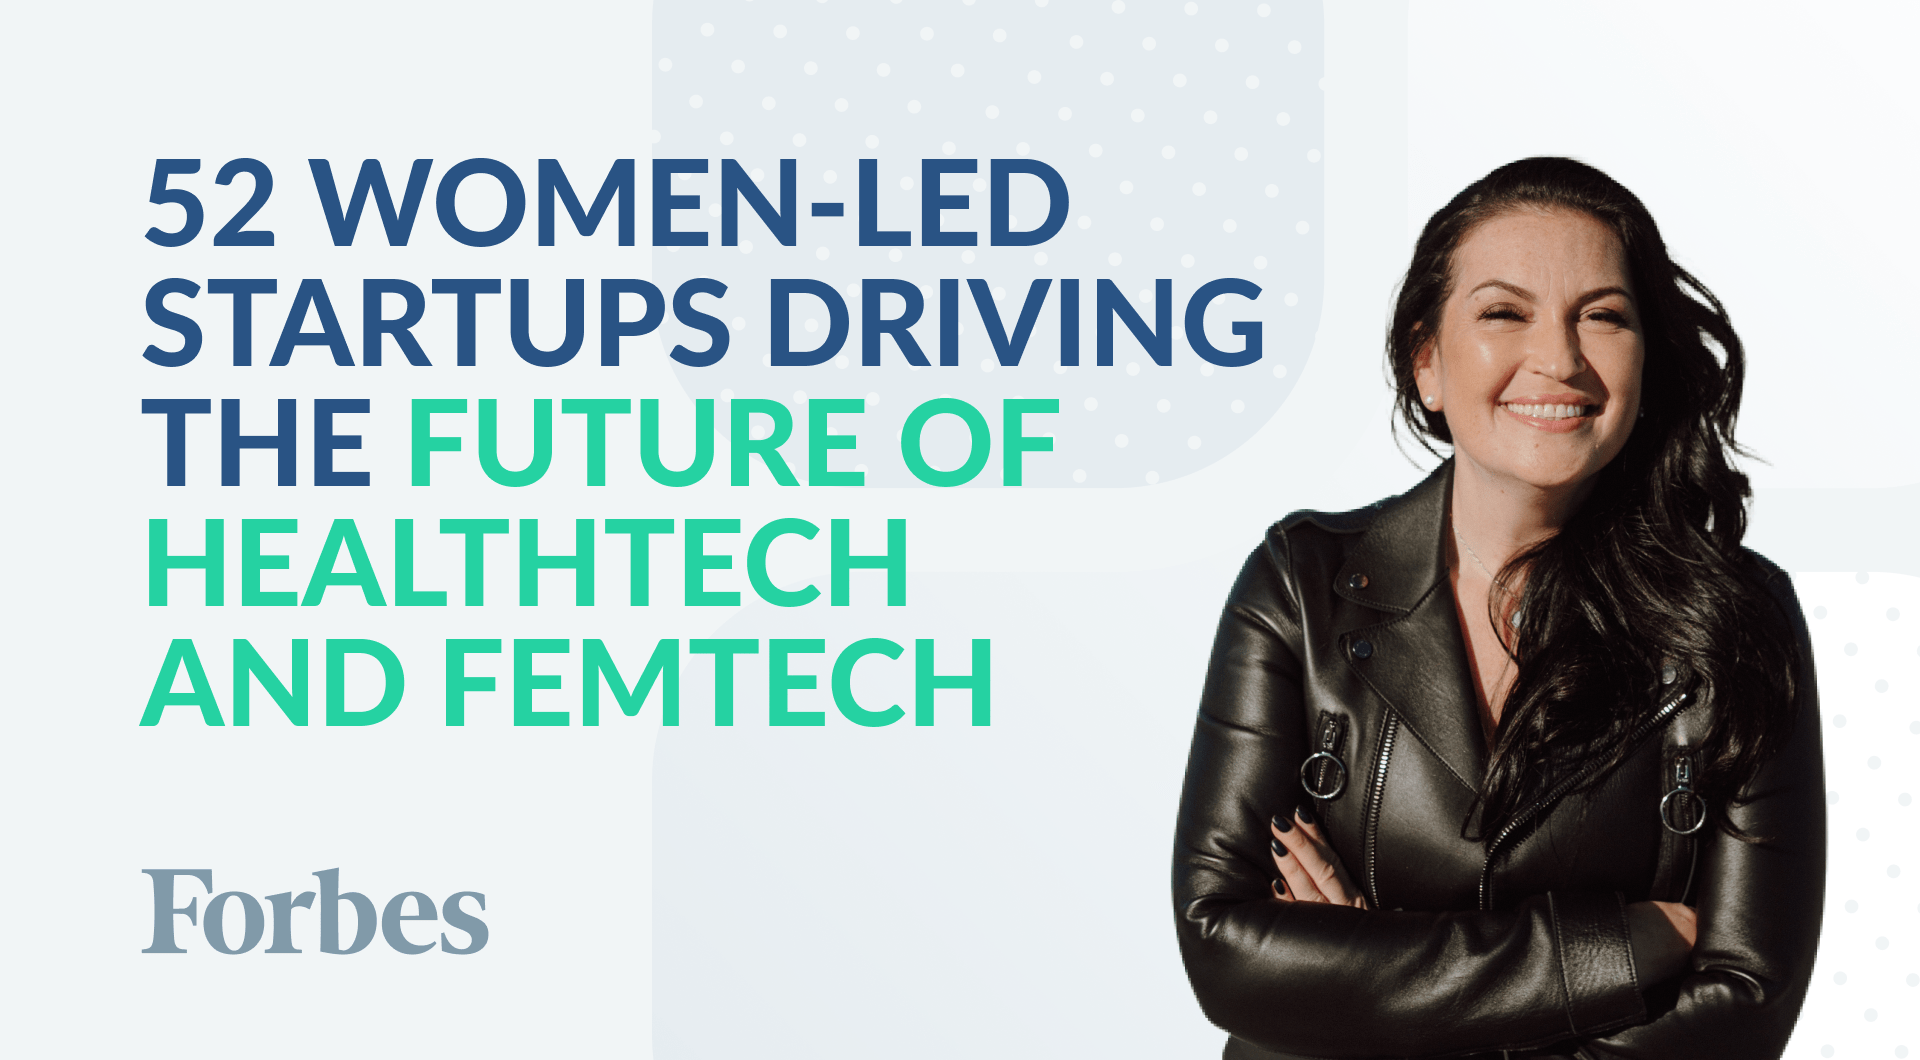 YourCoach Among 52 Women-Led Startups Driving The Future Of HealthTech And FemTech